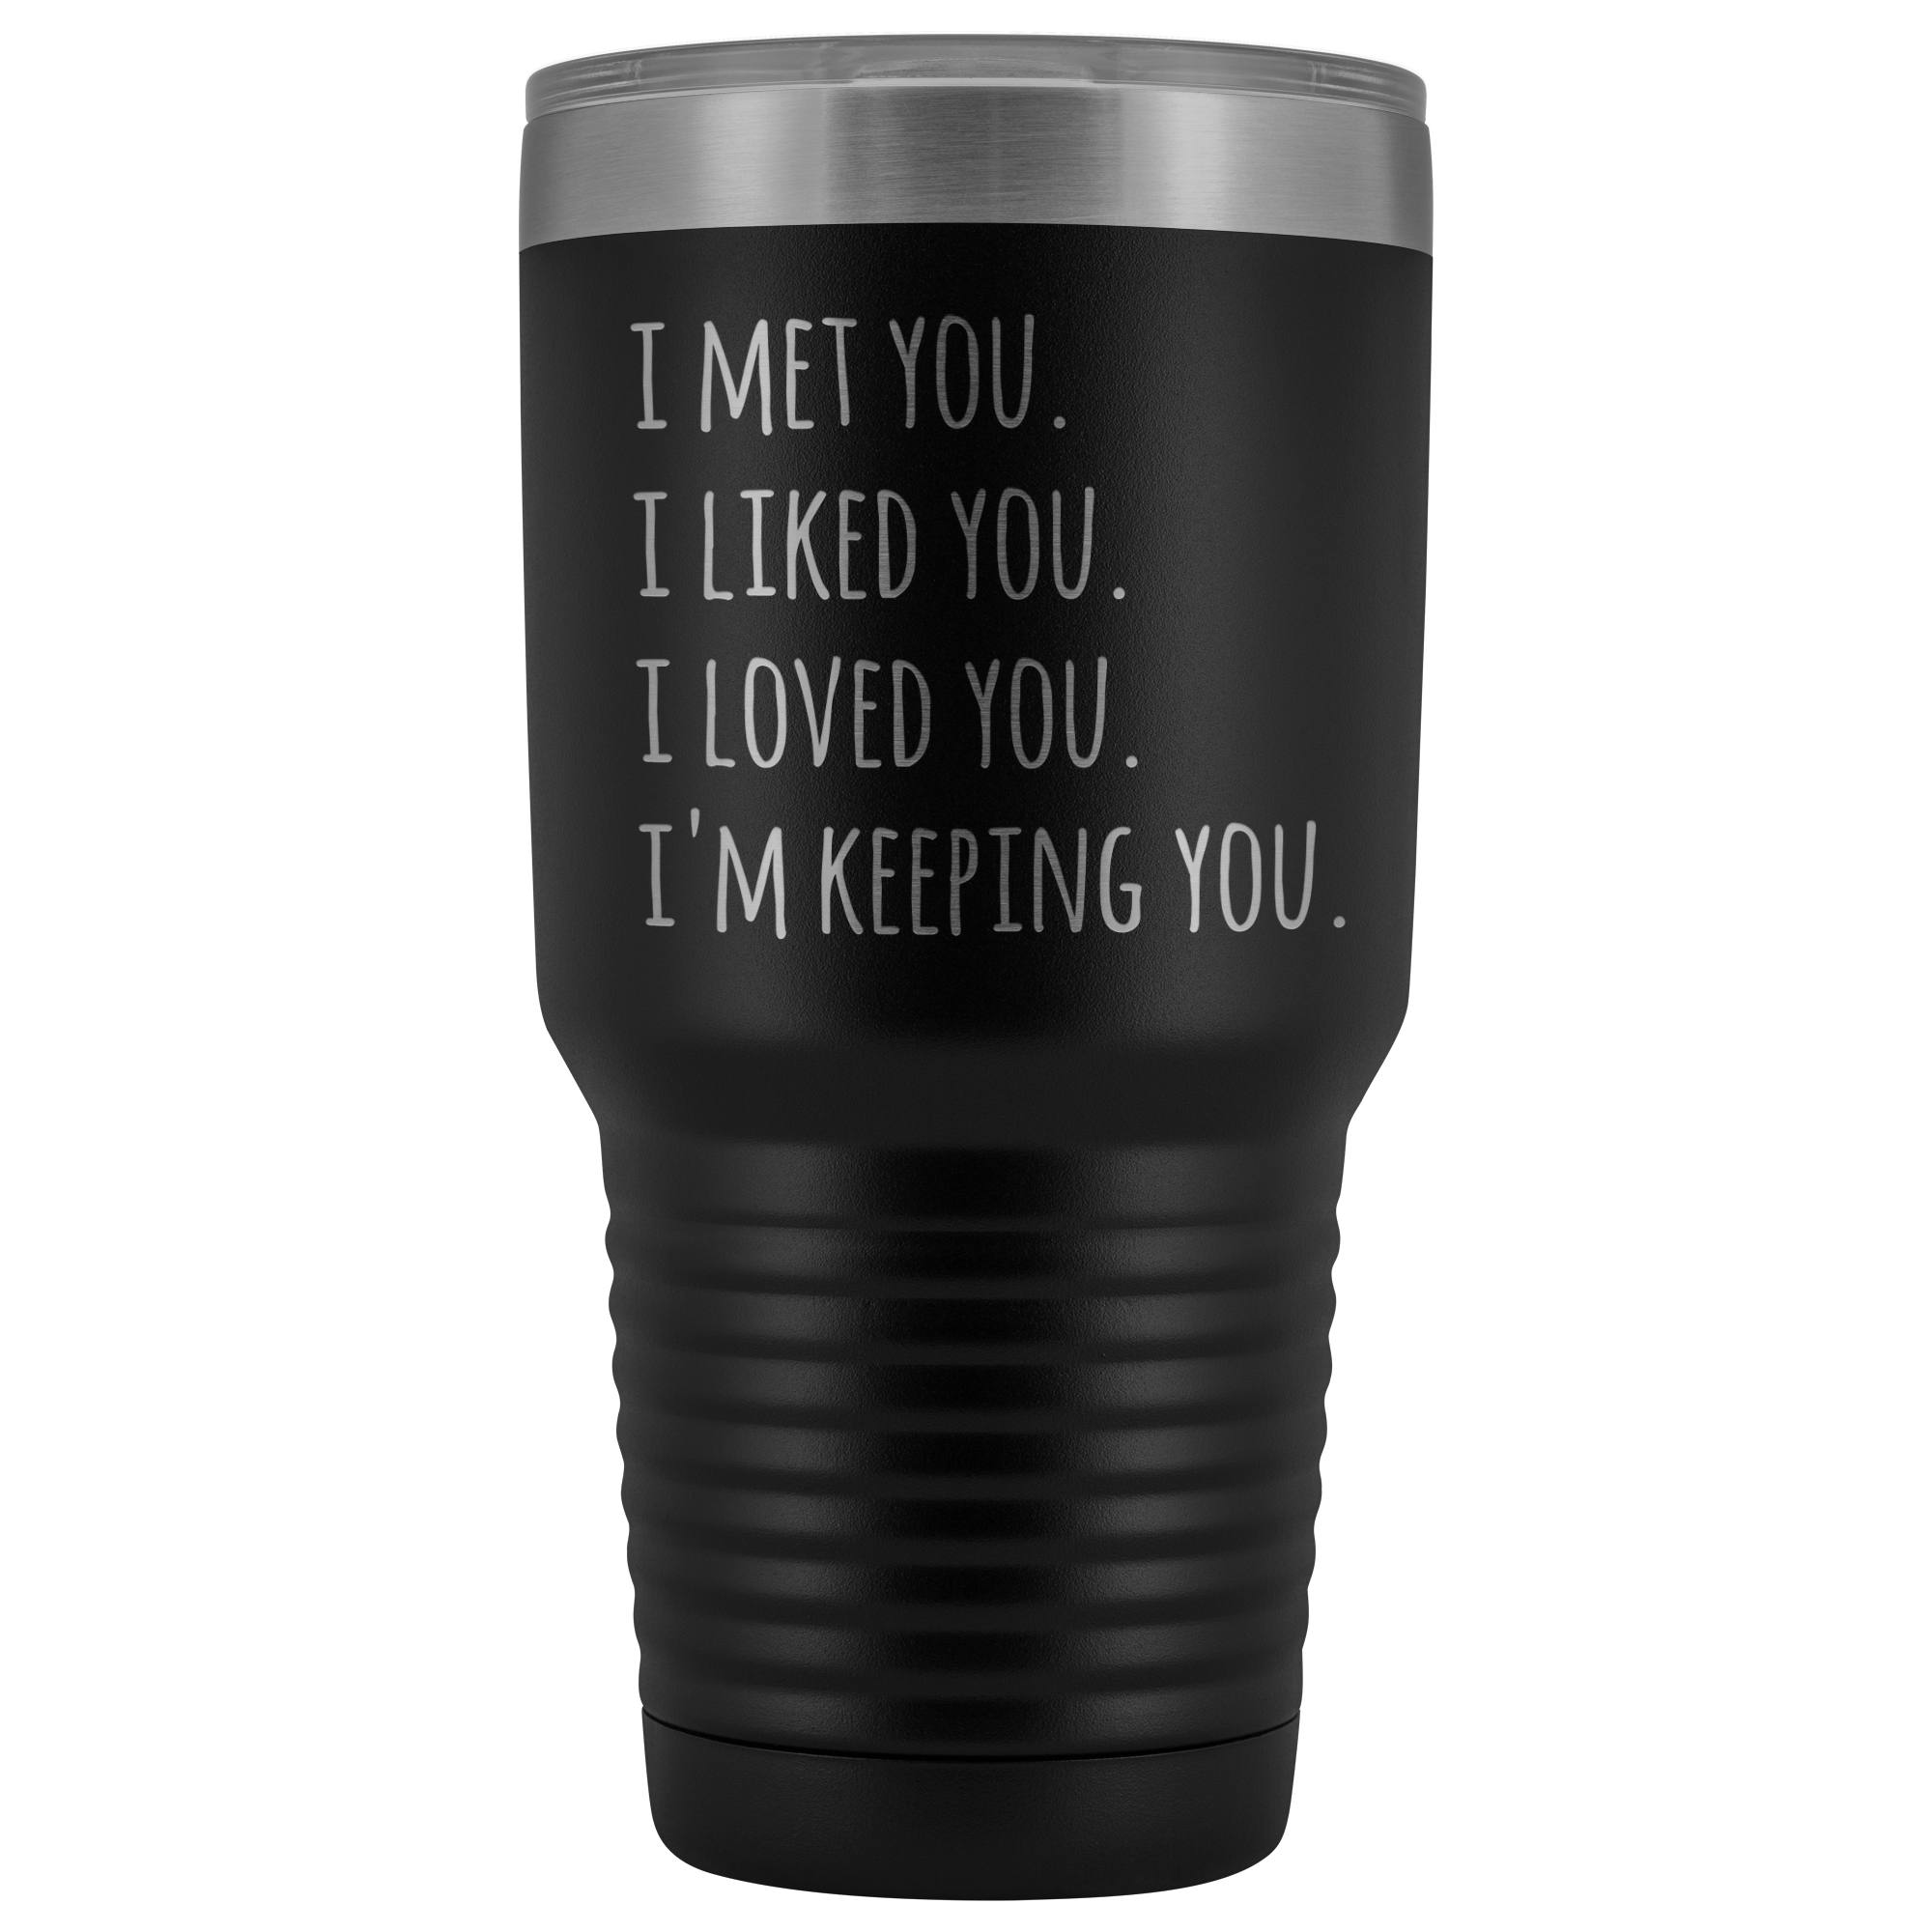 I Love You I'm Keeping You Valentines Day Gift for Boyfriend Girlfriend Tumbler Mug Insulated Hot Cold Travel Coffee Cup 30oz BPA Free